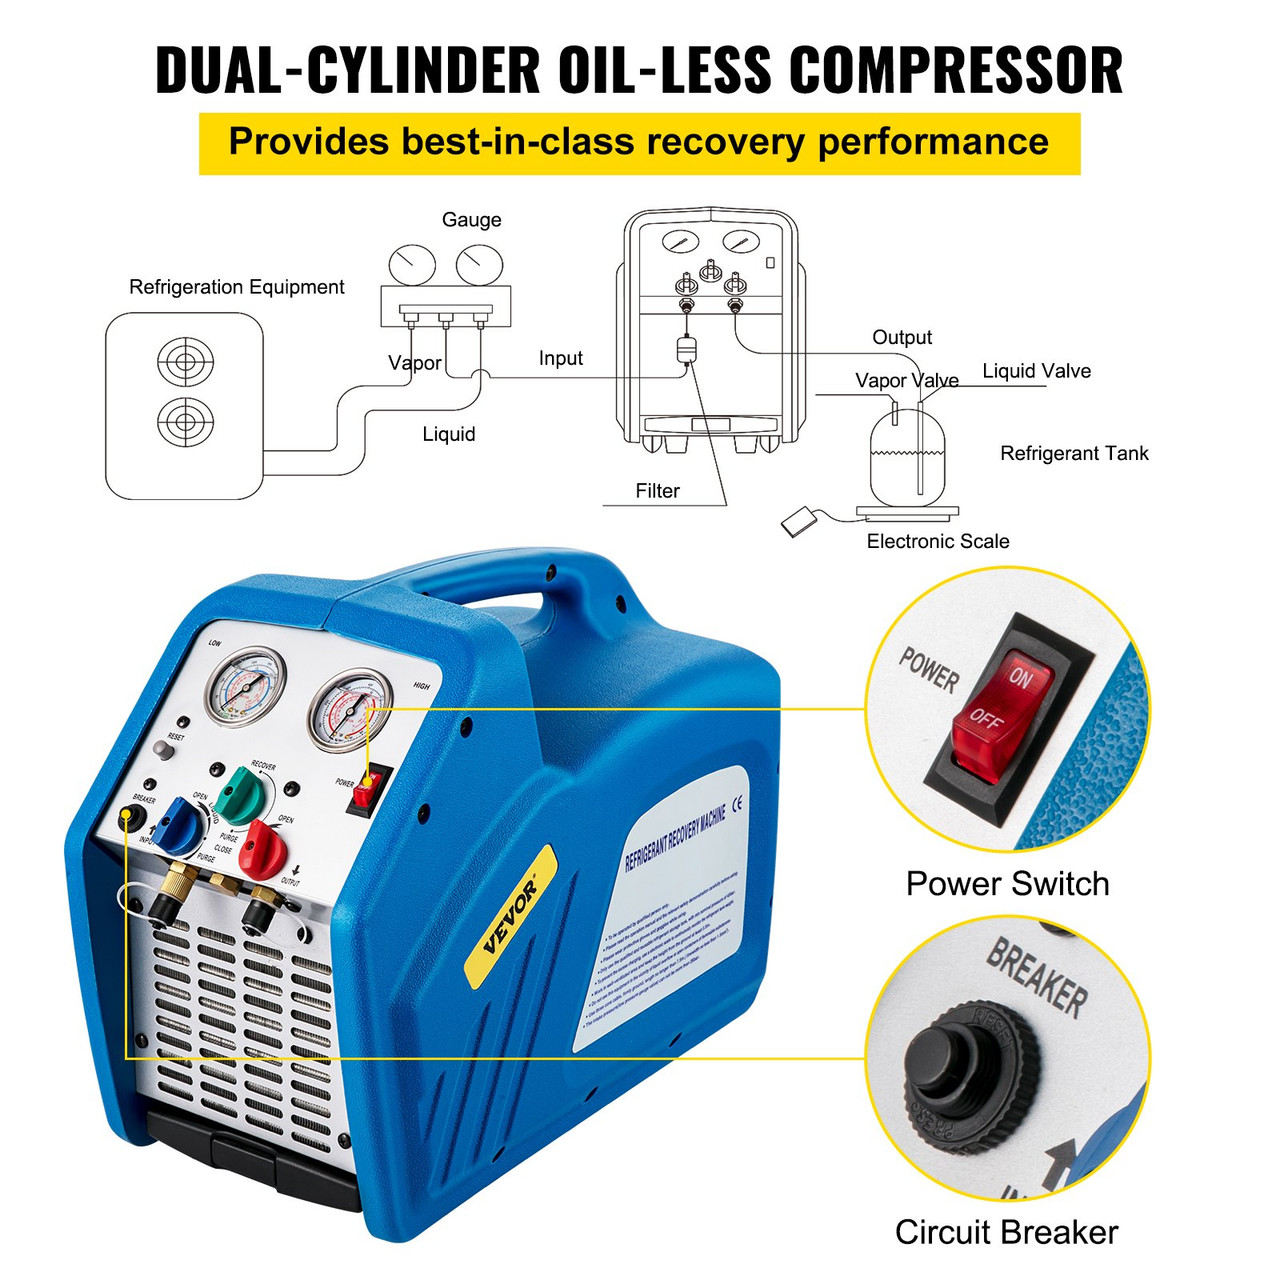 Refrigerant Recovery Machine, 115V 60Hz Portable Freon Recycle Unit for Automotive A/C Systems, 1HP Dual Cylinder for Both Liquid and Vapor Refrigerant, Air Condition Blue